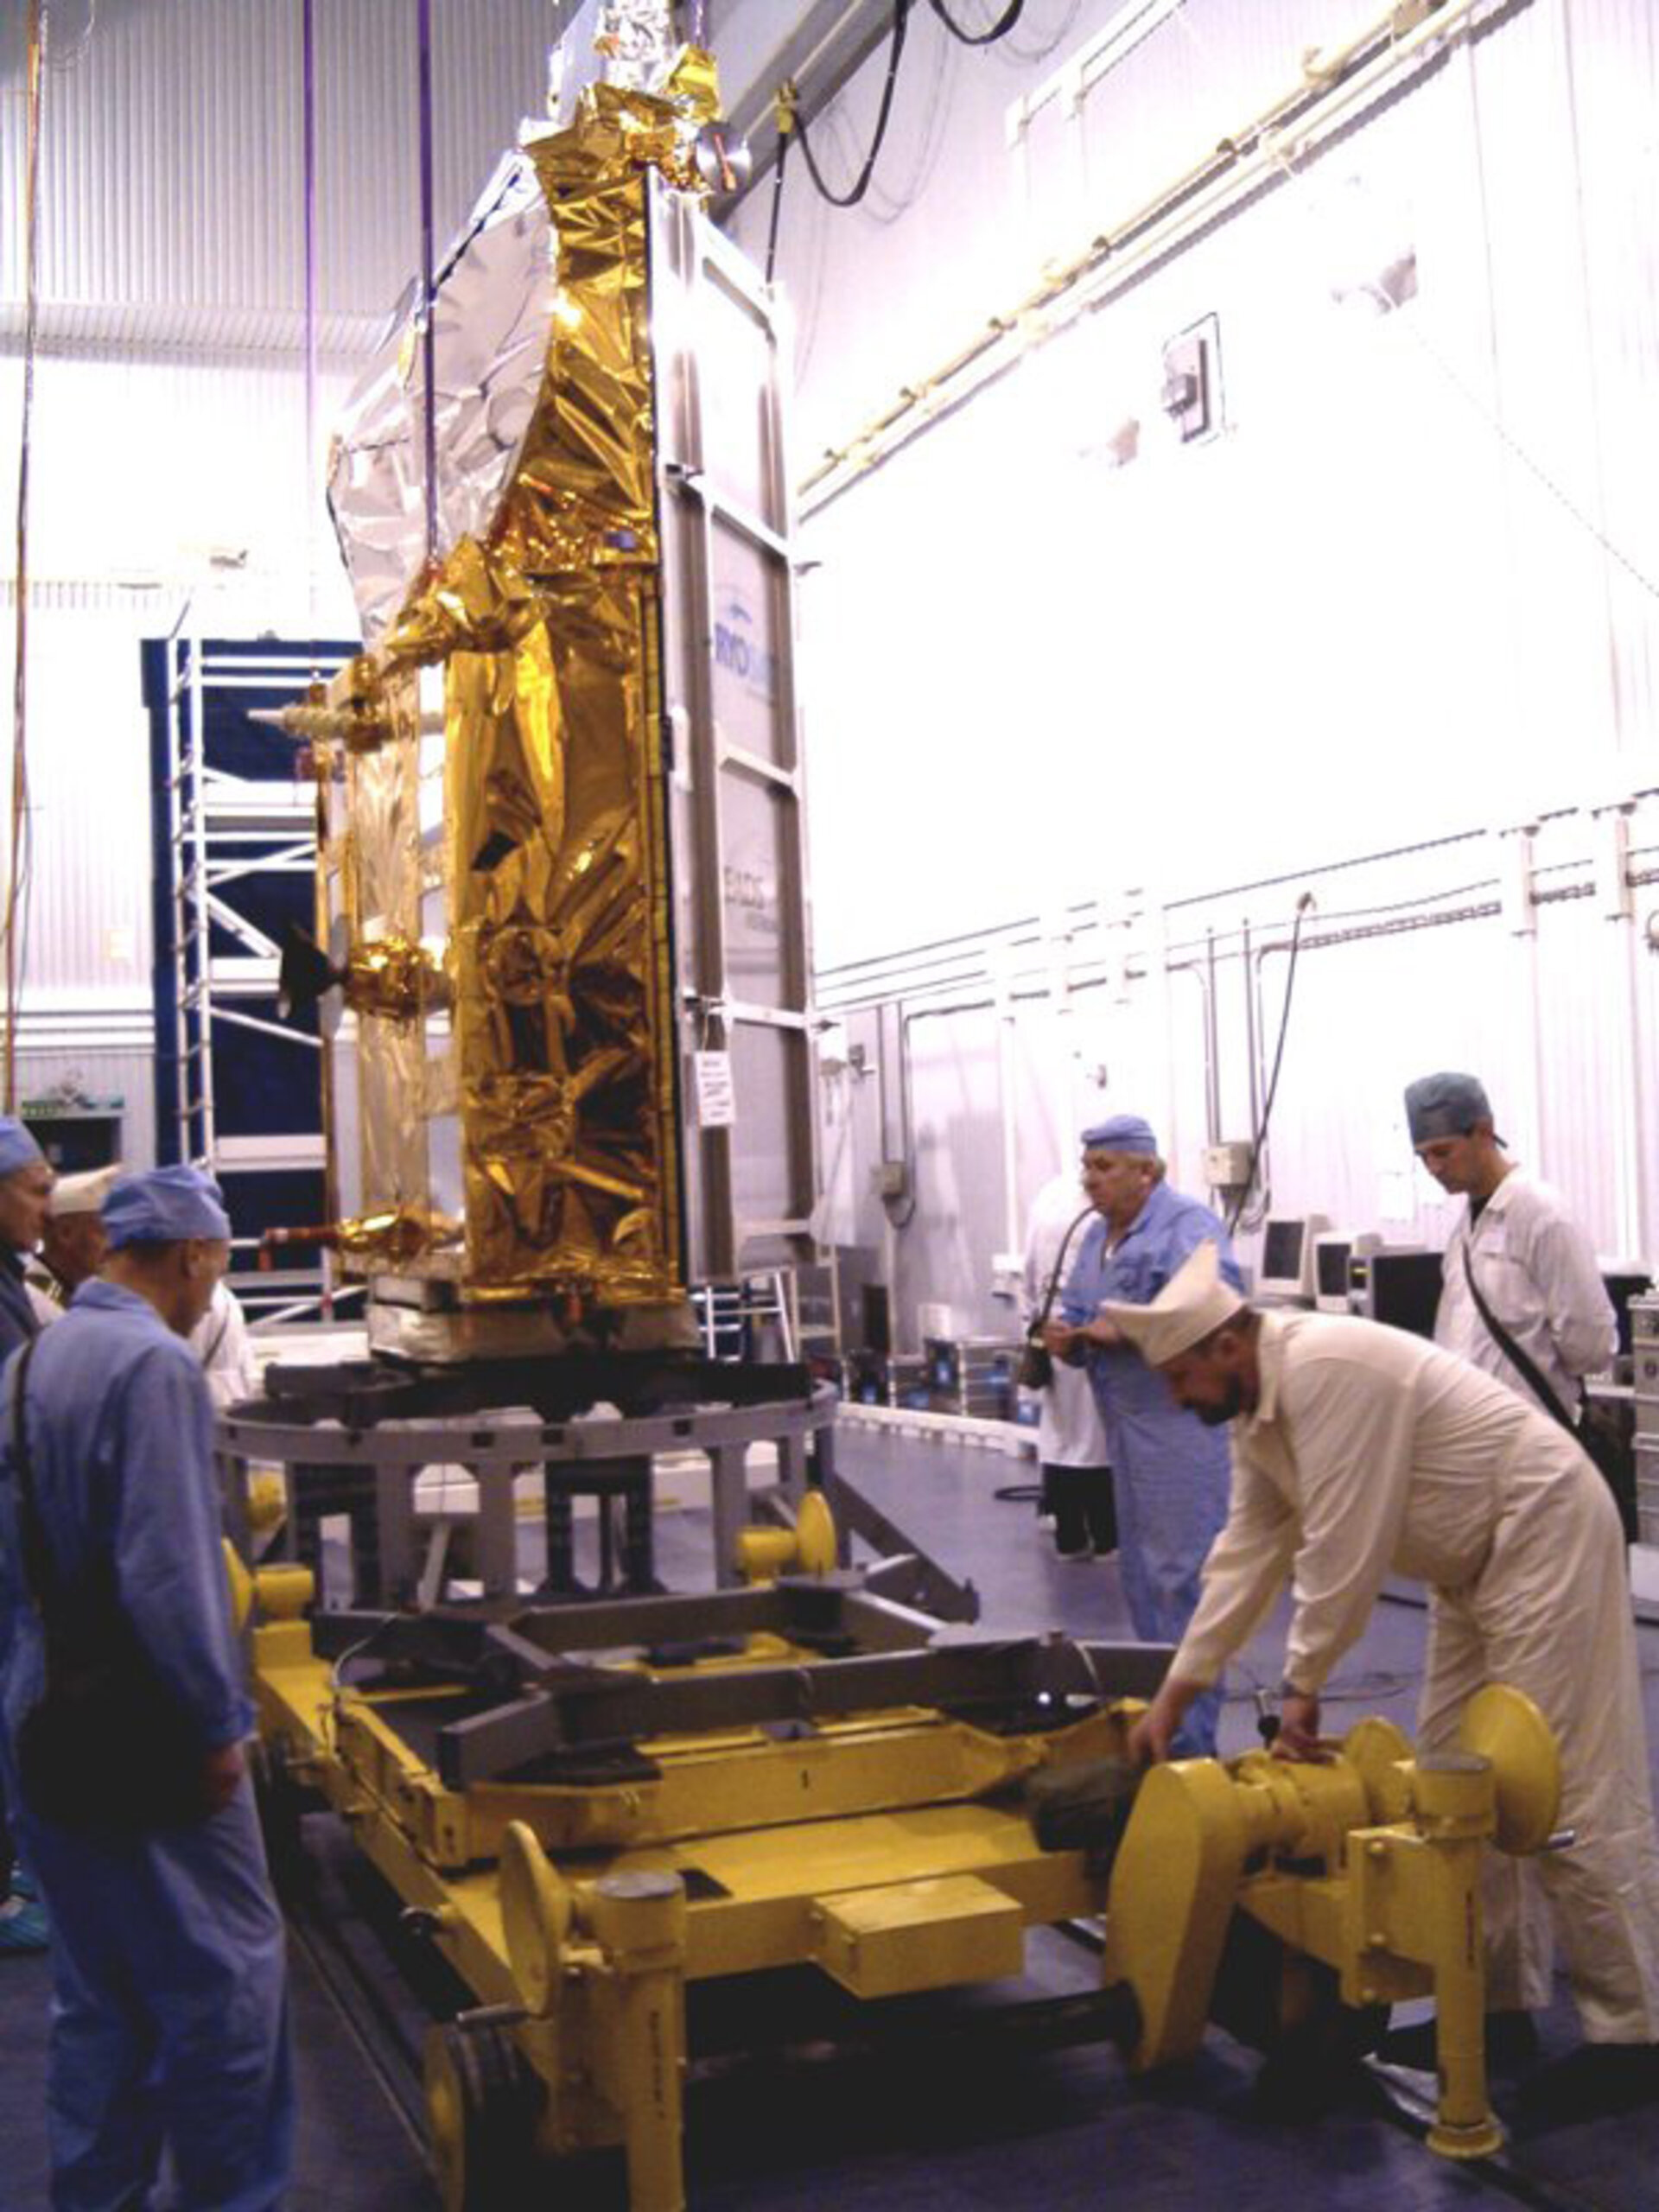 CryoSat is rolled to clean room B